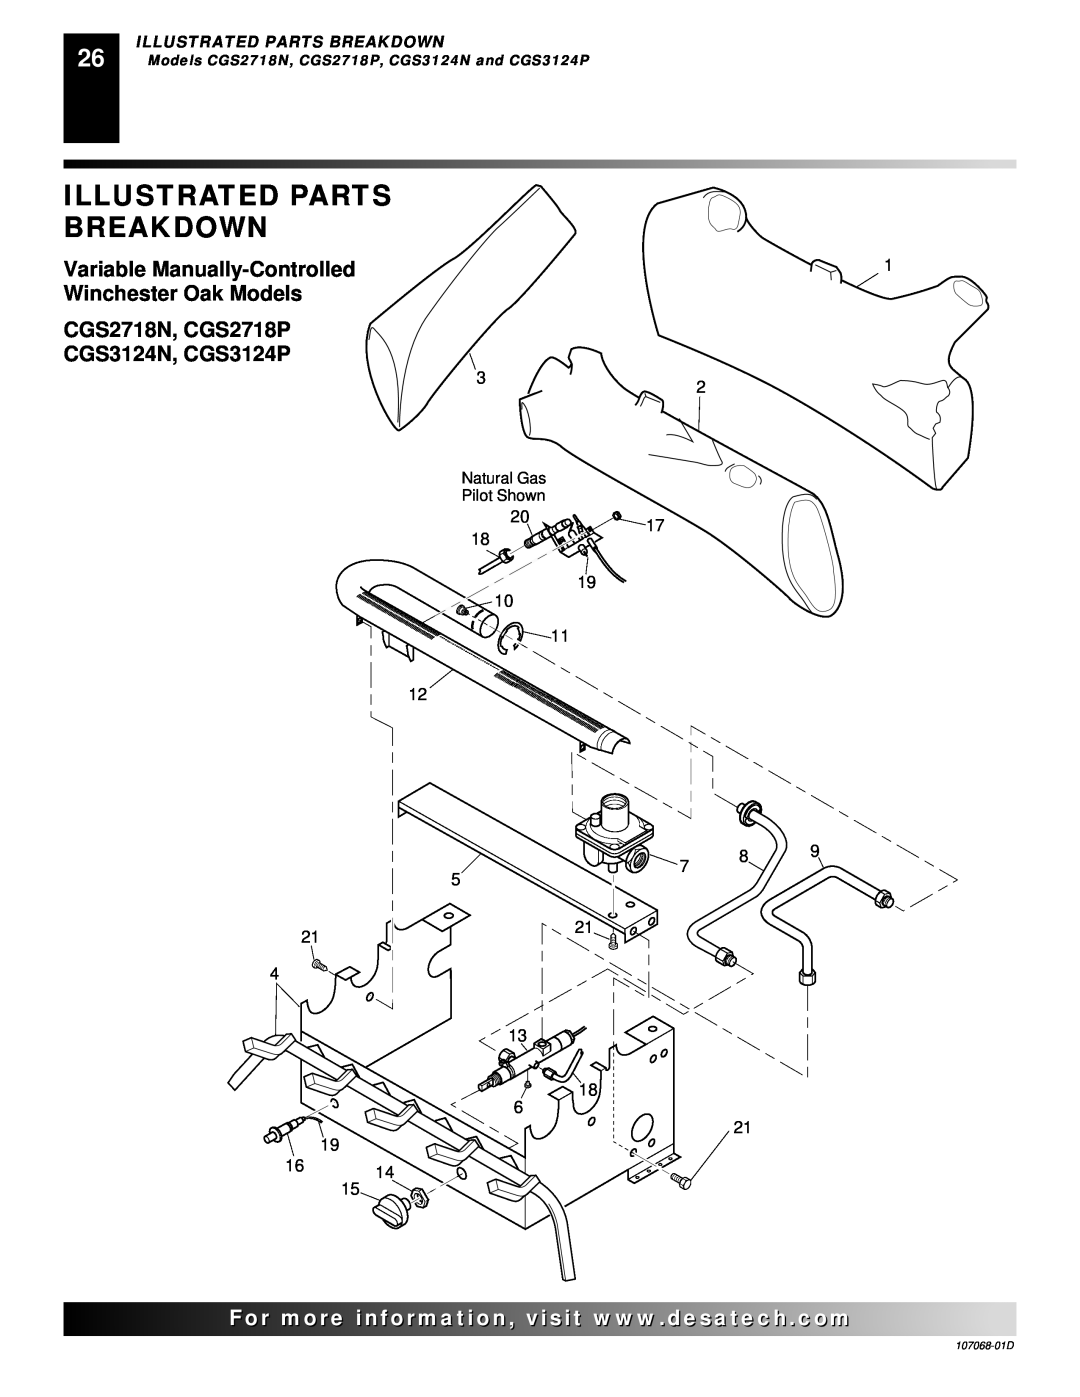 Desa CGS3124P Illustrated Parts Breakdown, Variable Manually-Controlled, Winchester Oak Models, 107068-01D 